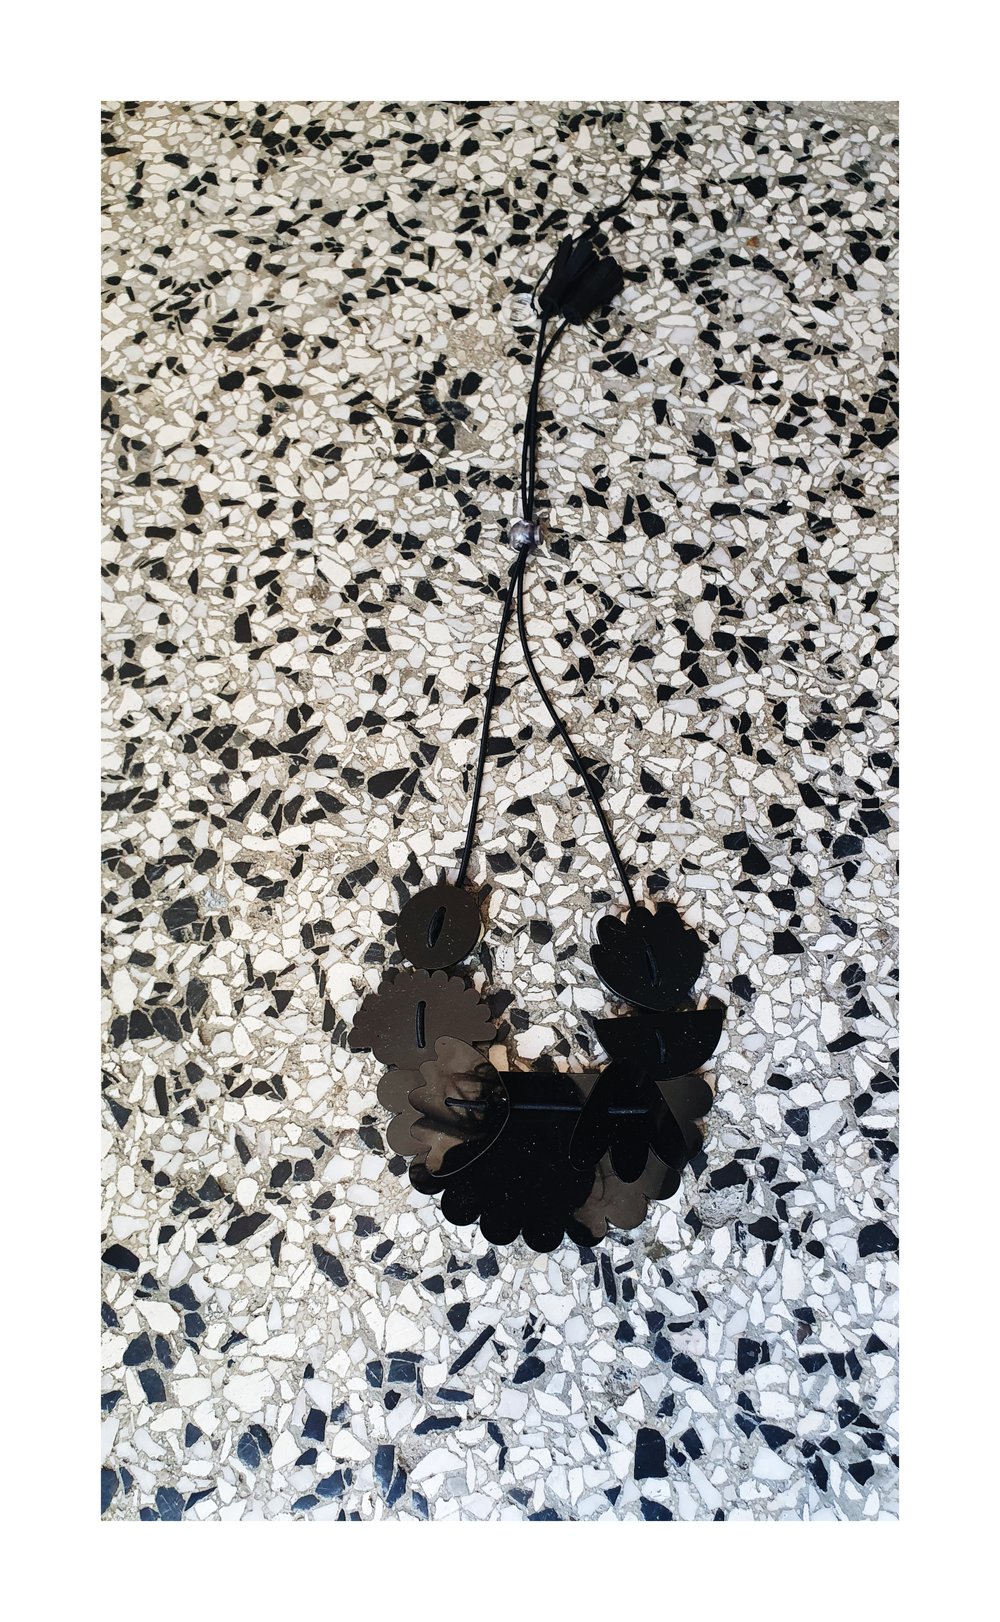 ogrlica p l e k s i ROŽA.11 // necklace p l e x i g l a s s FLOWER.11